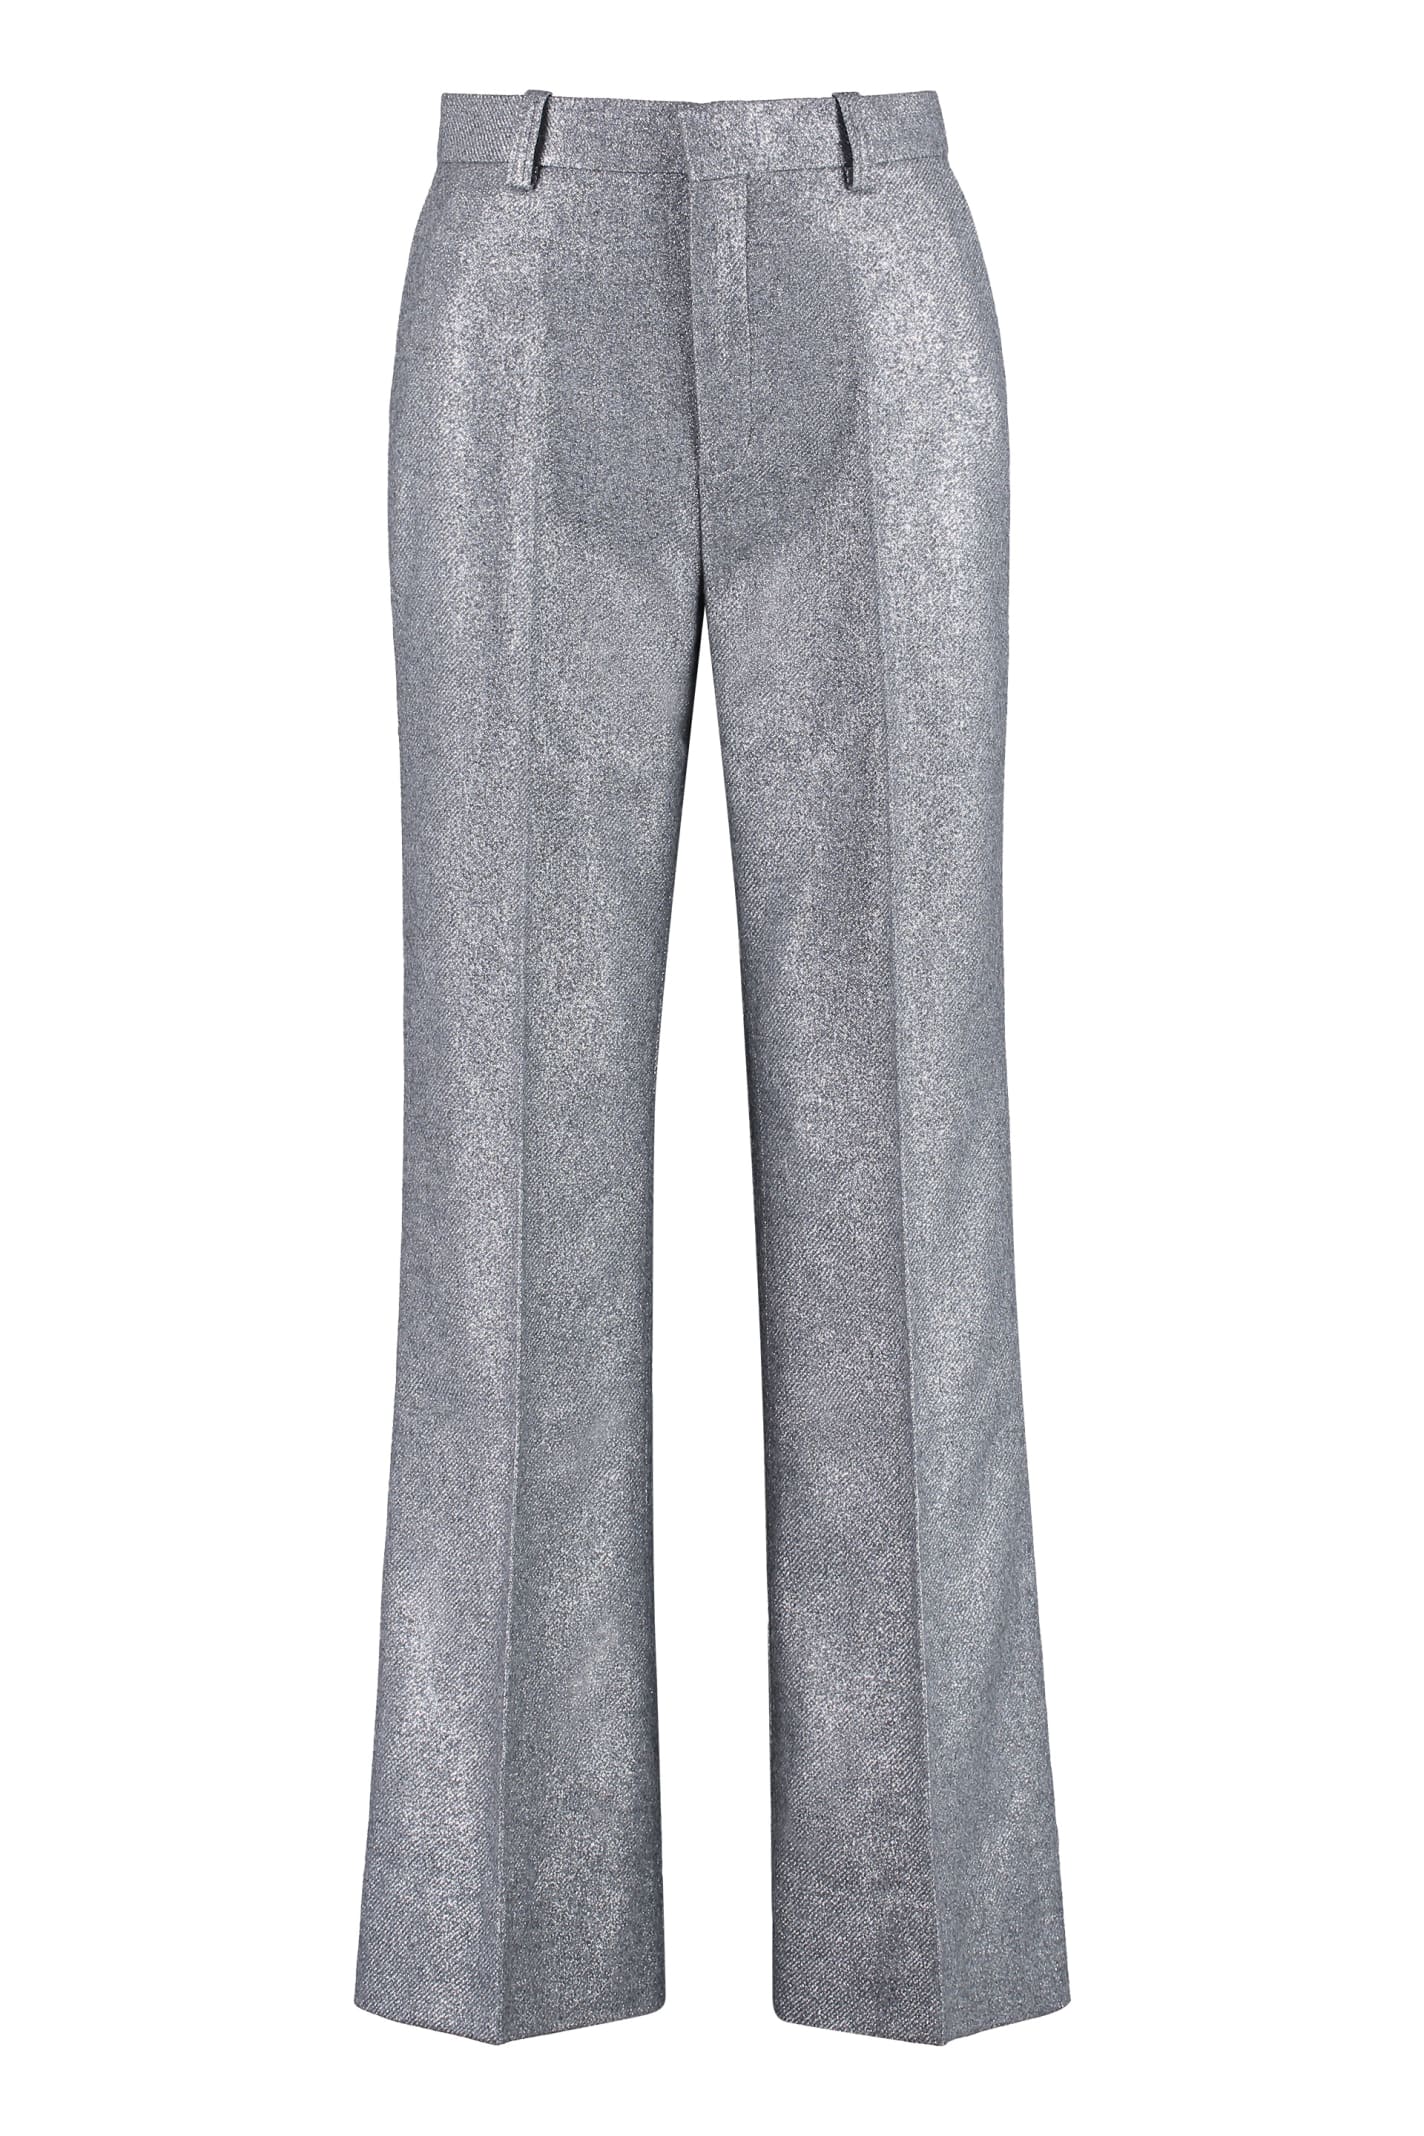 Rodebjer Emma Flared-leg Tailored Trousers